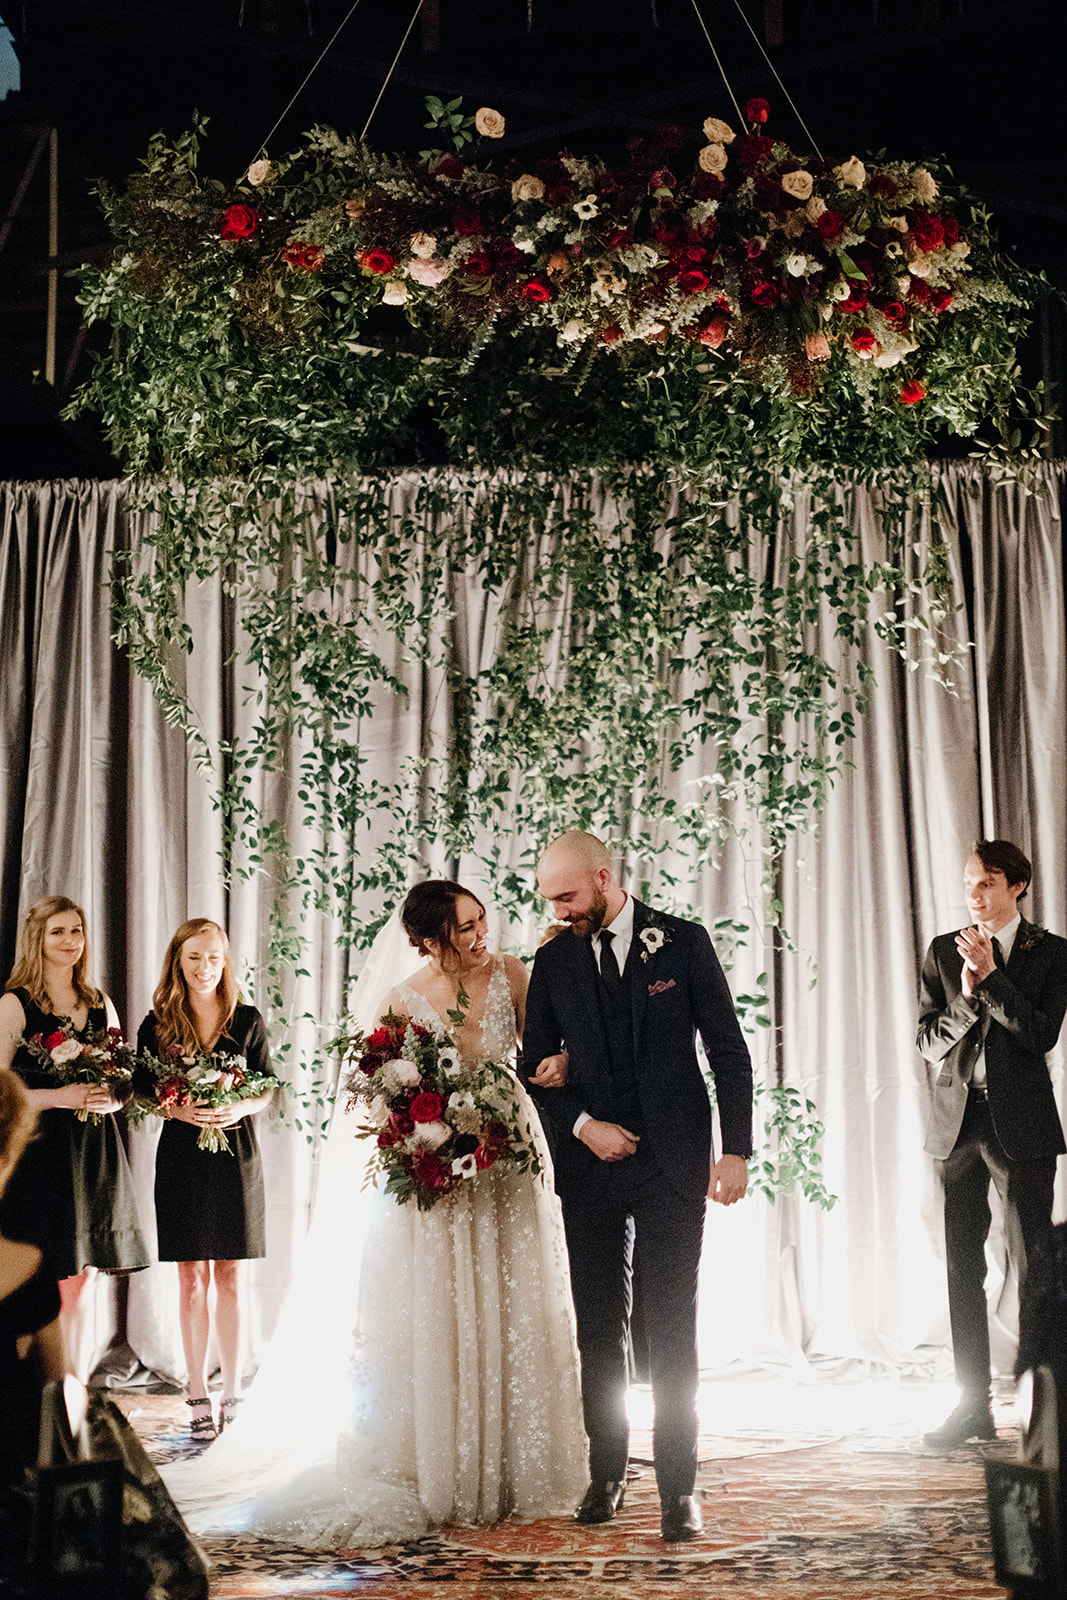 Oversized wreath floral installation with eggplant and burgundy florals and a curtain of greenery. Nashville Wedding Floral Design.